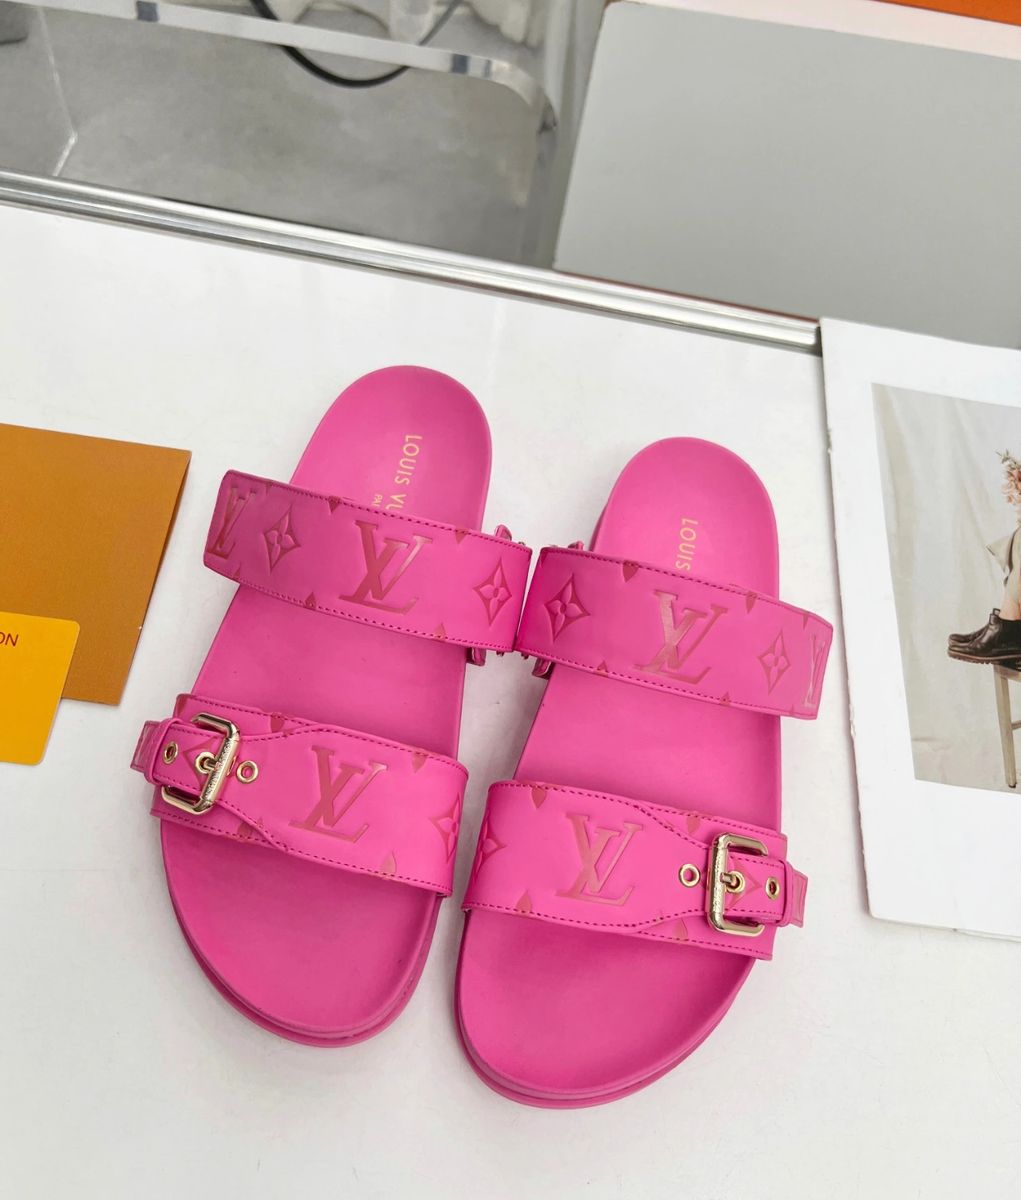 LV Bom Dia Flat Comfort Mule! These are my fav Info in bye-oh 🩶 #bom, Affordable Slides